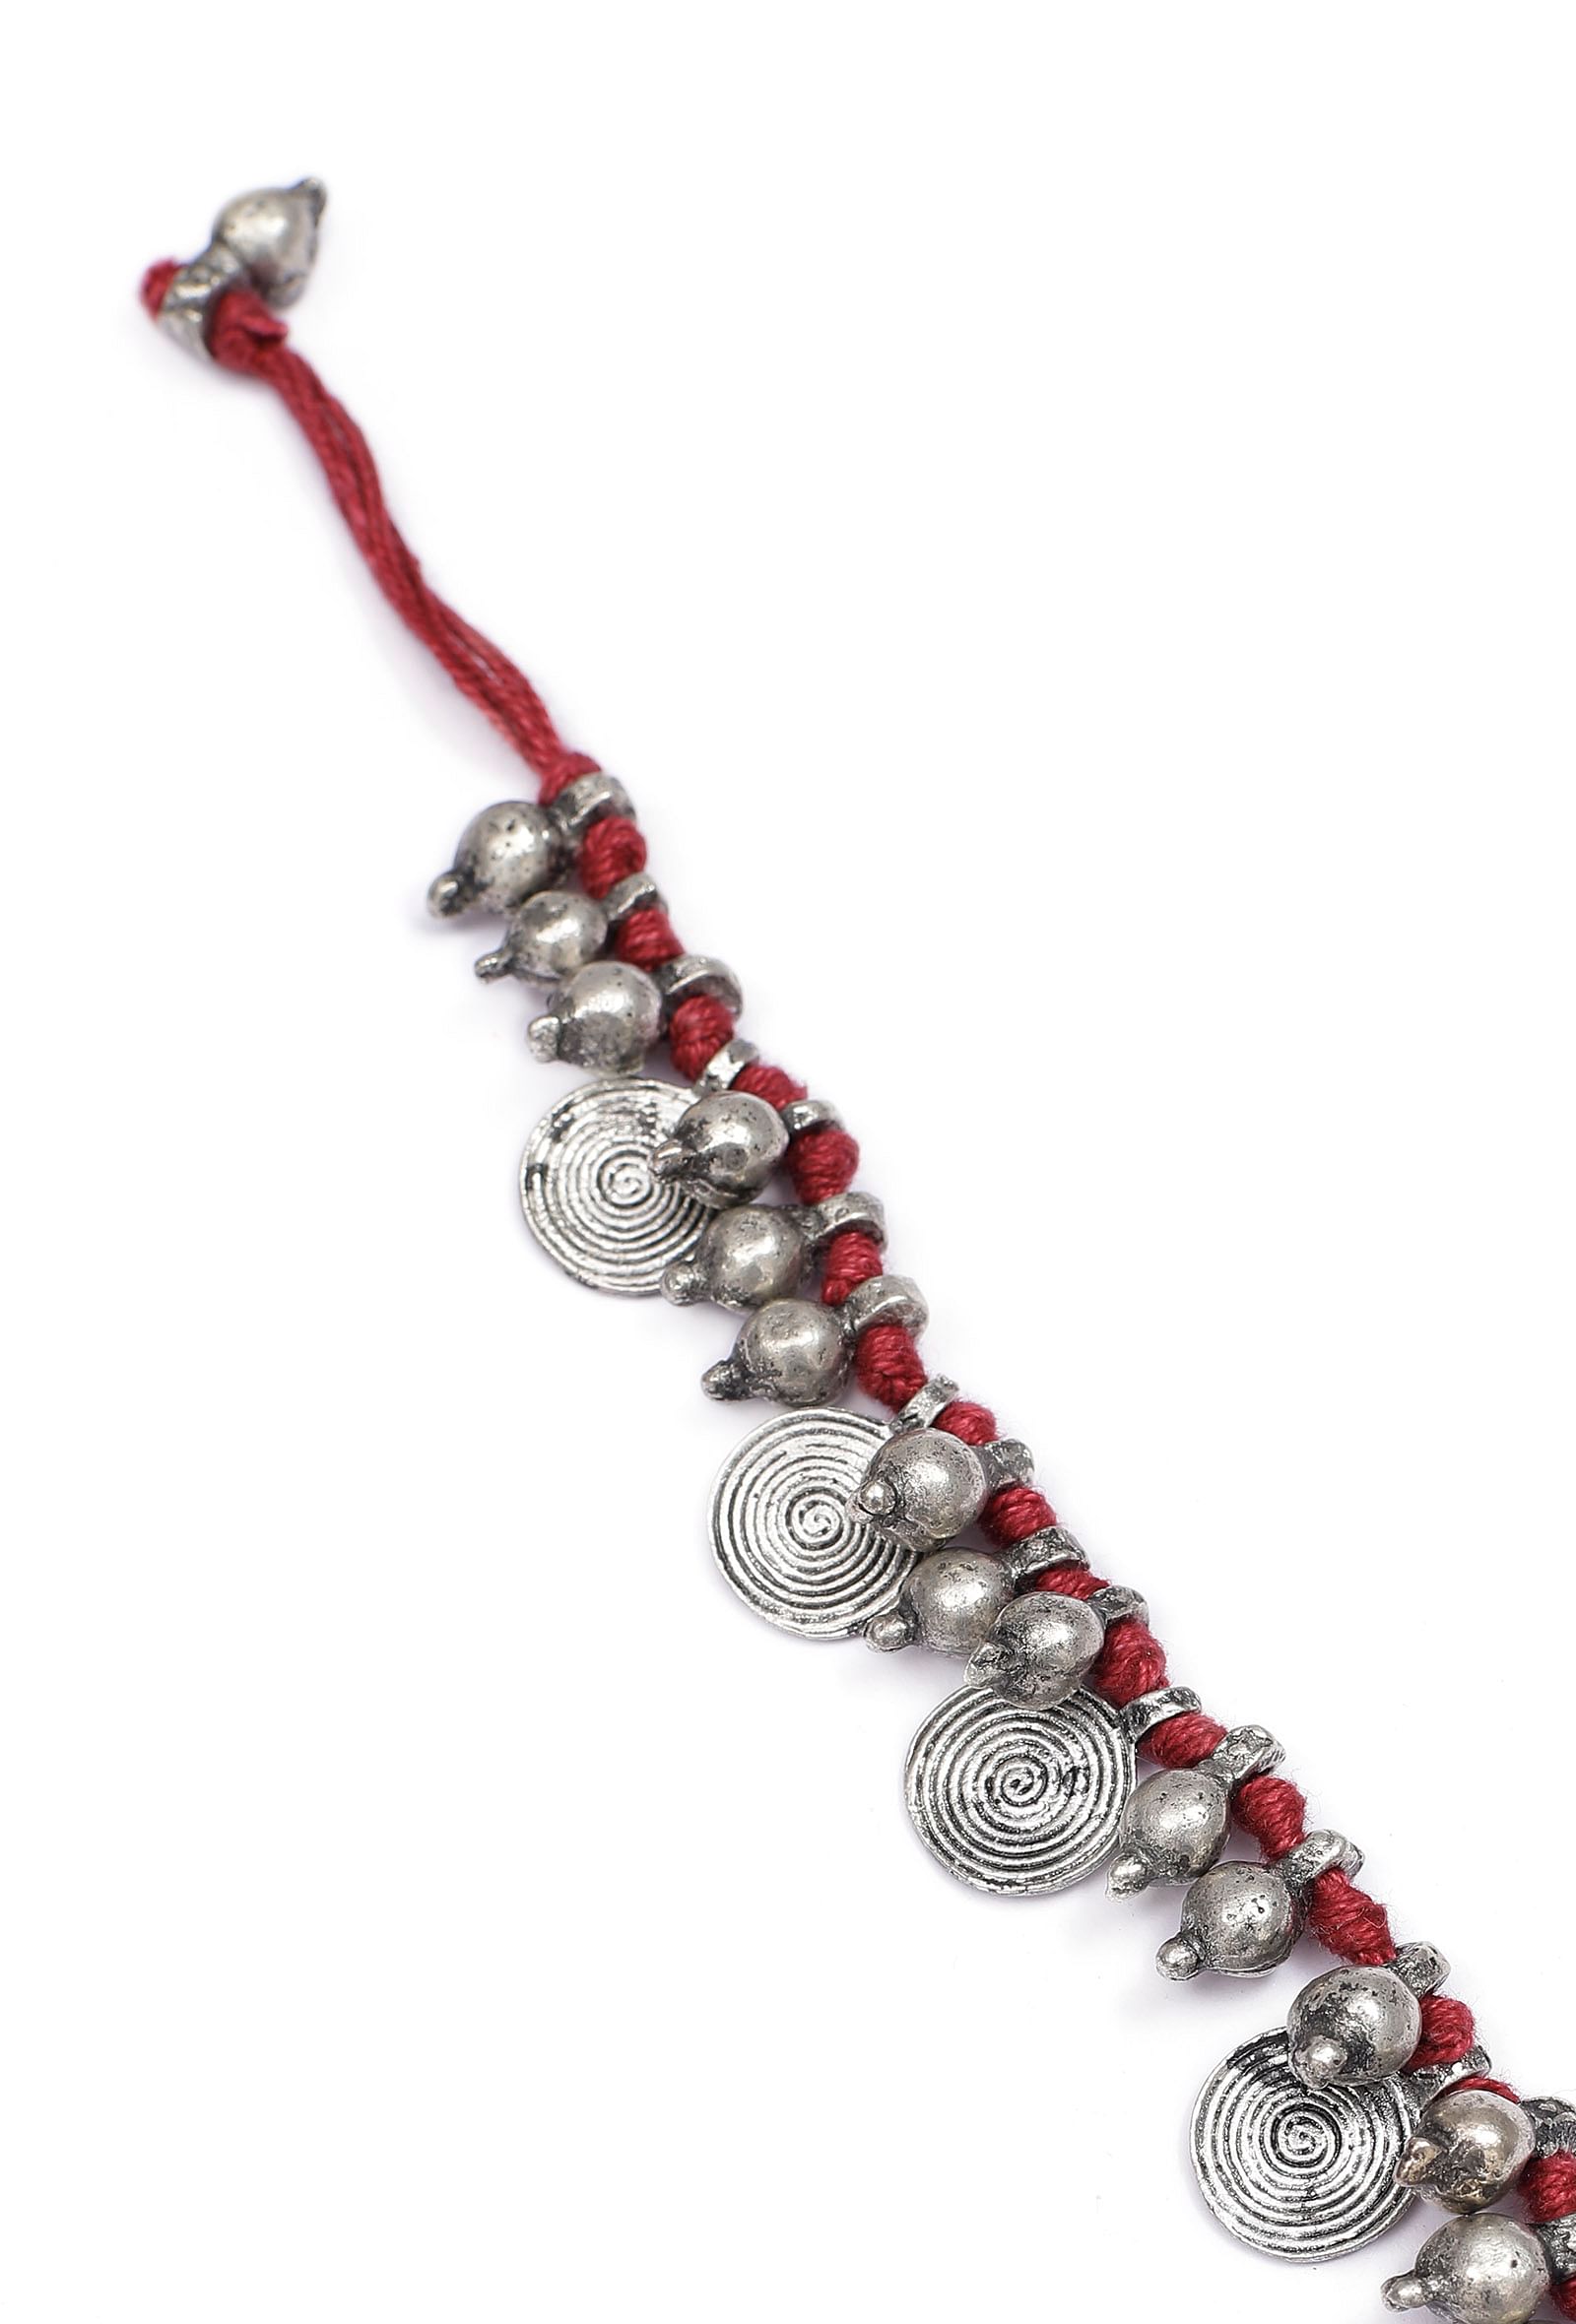 Scarlet Maroon with Silver Beads Necklace